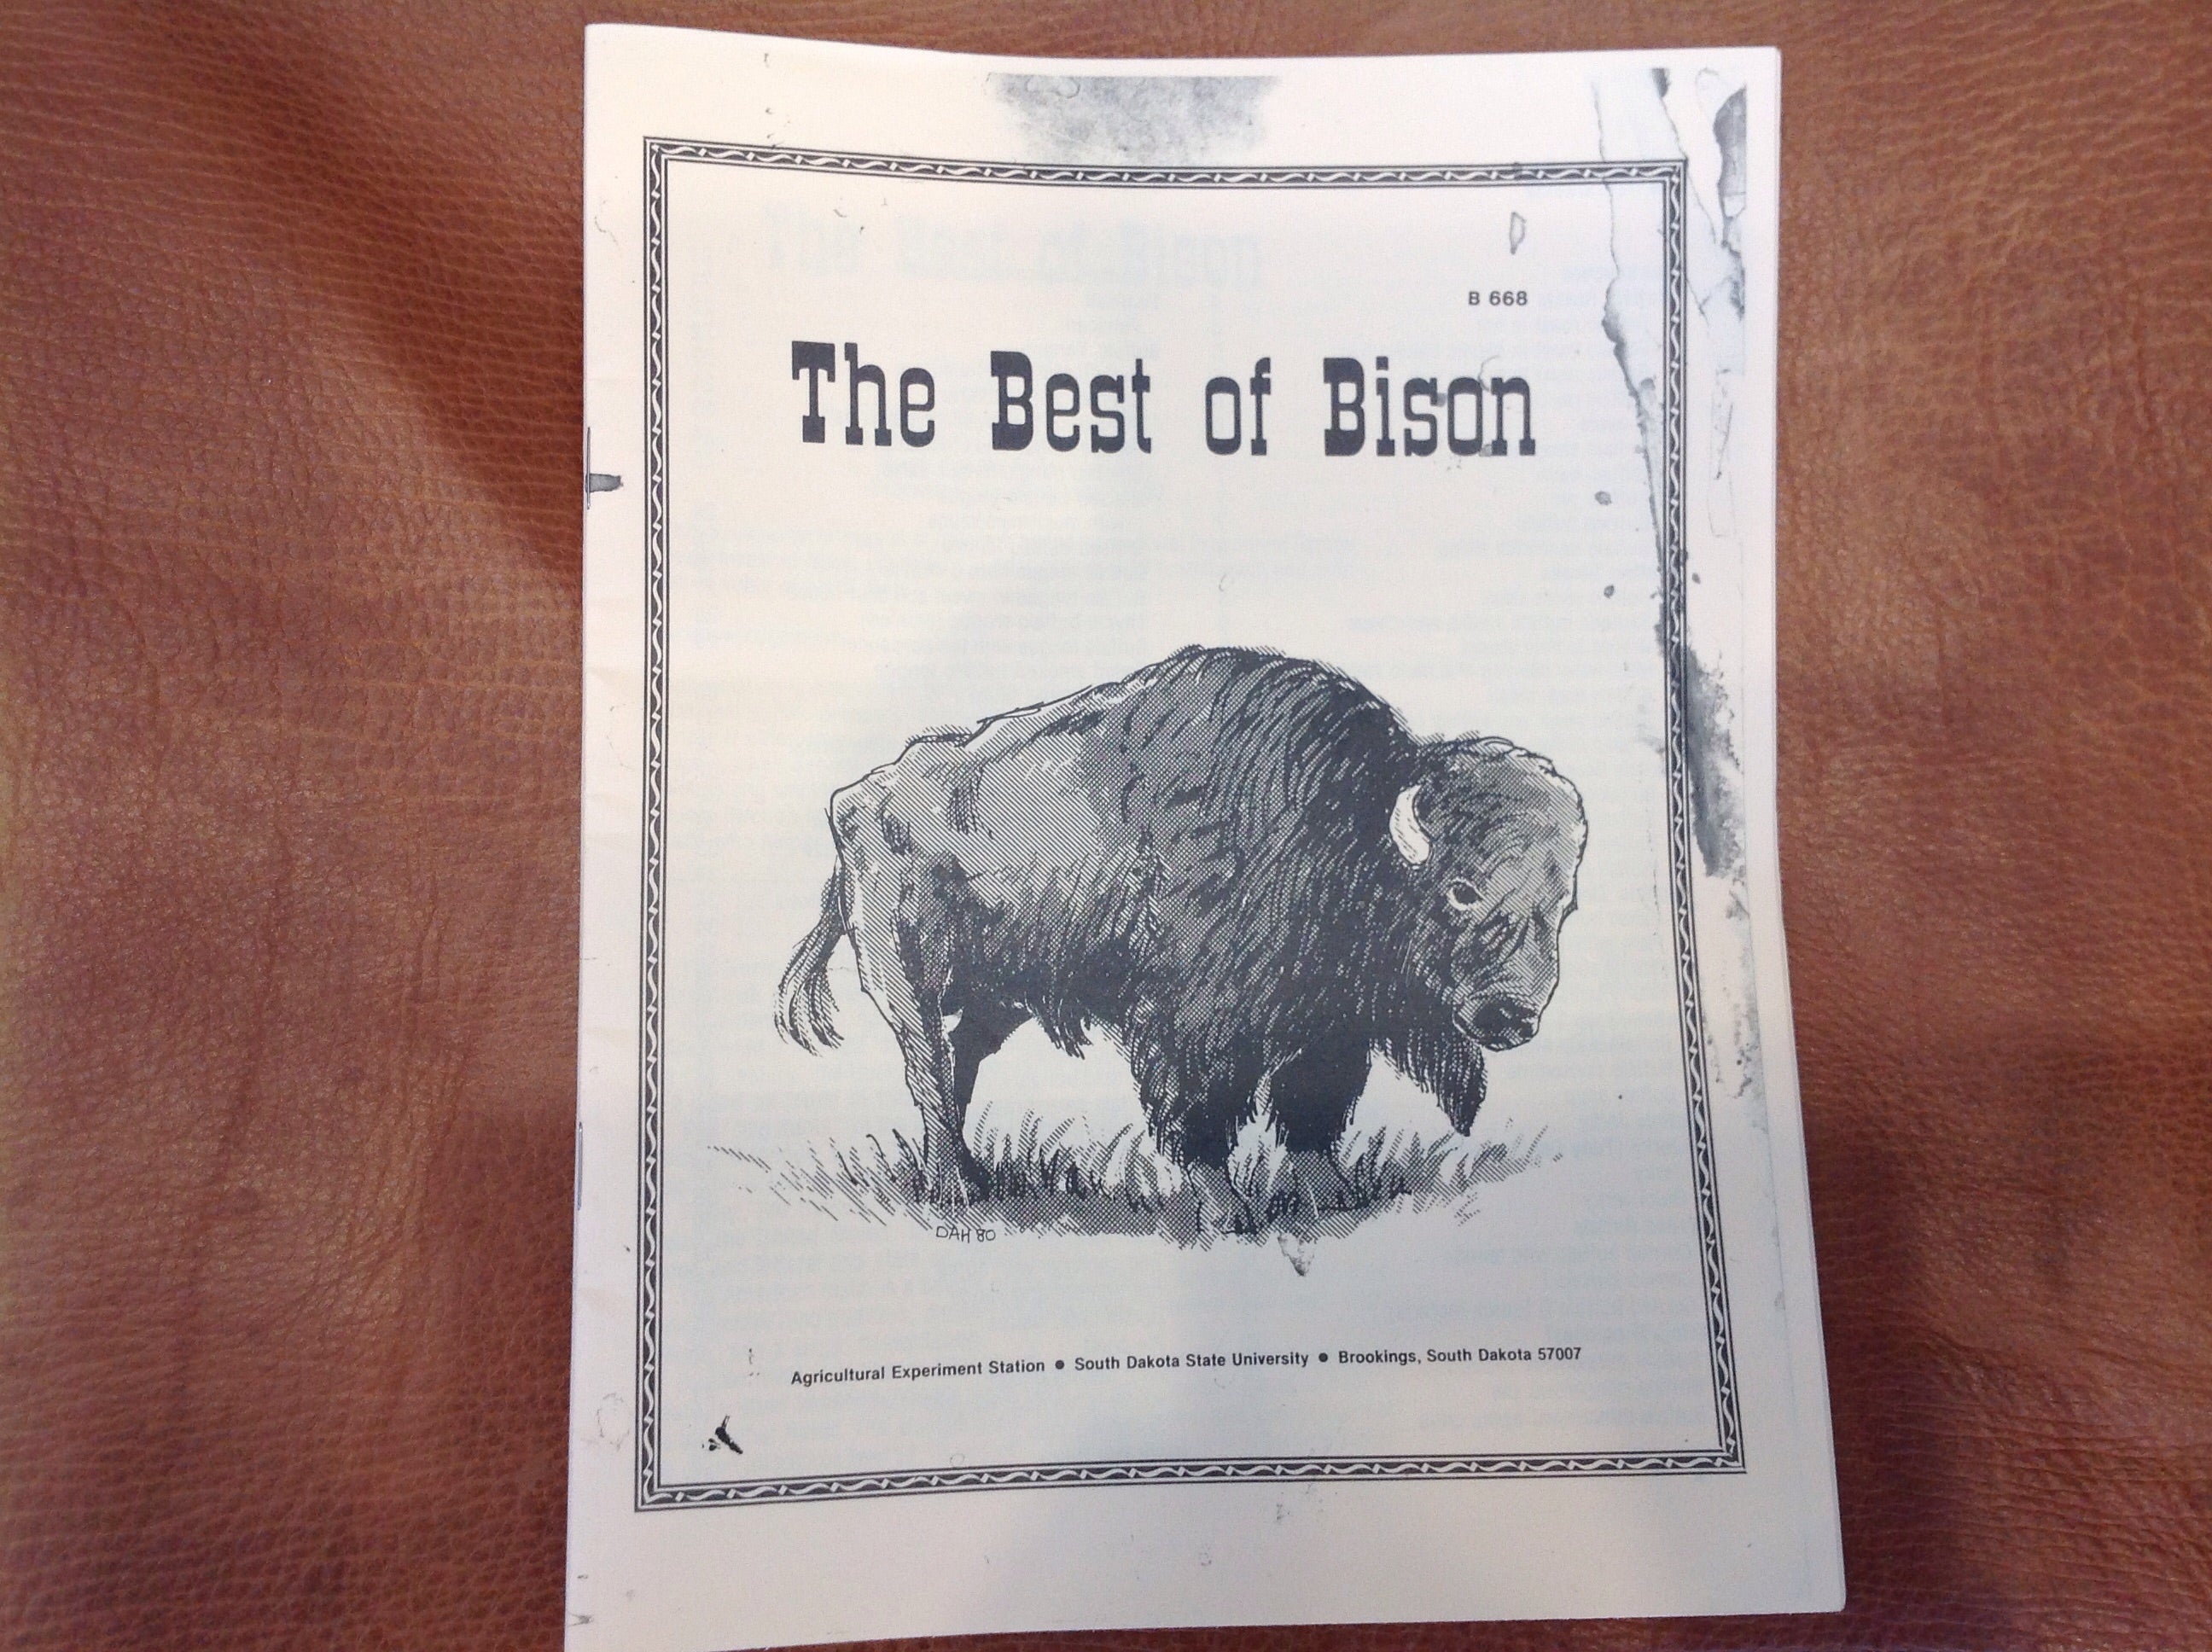 BOOKS - The Best of Bison cookbook